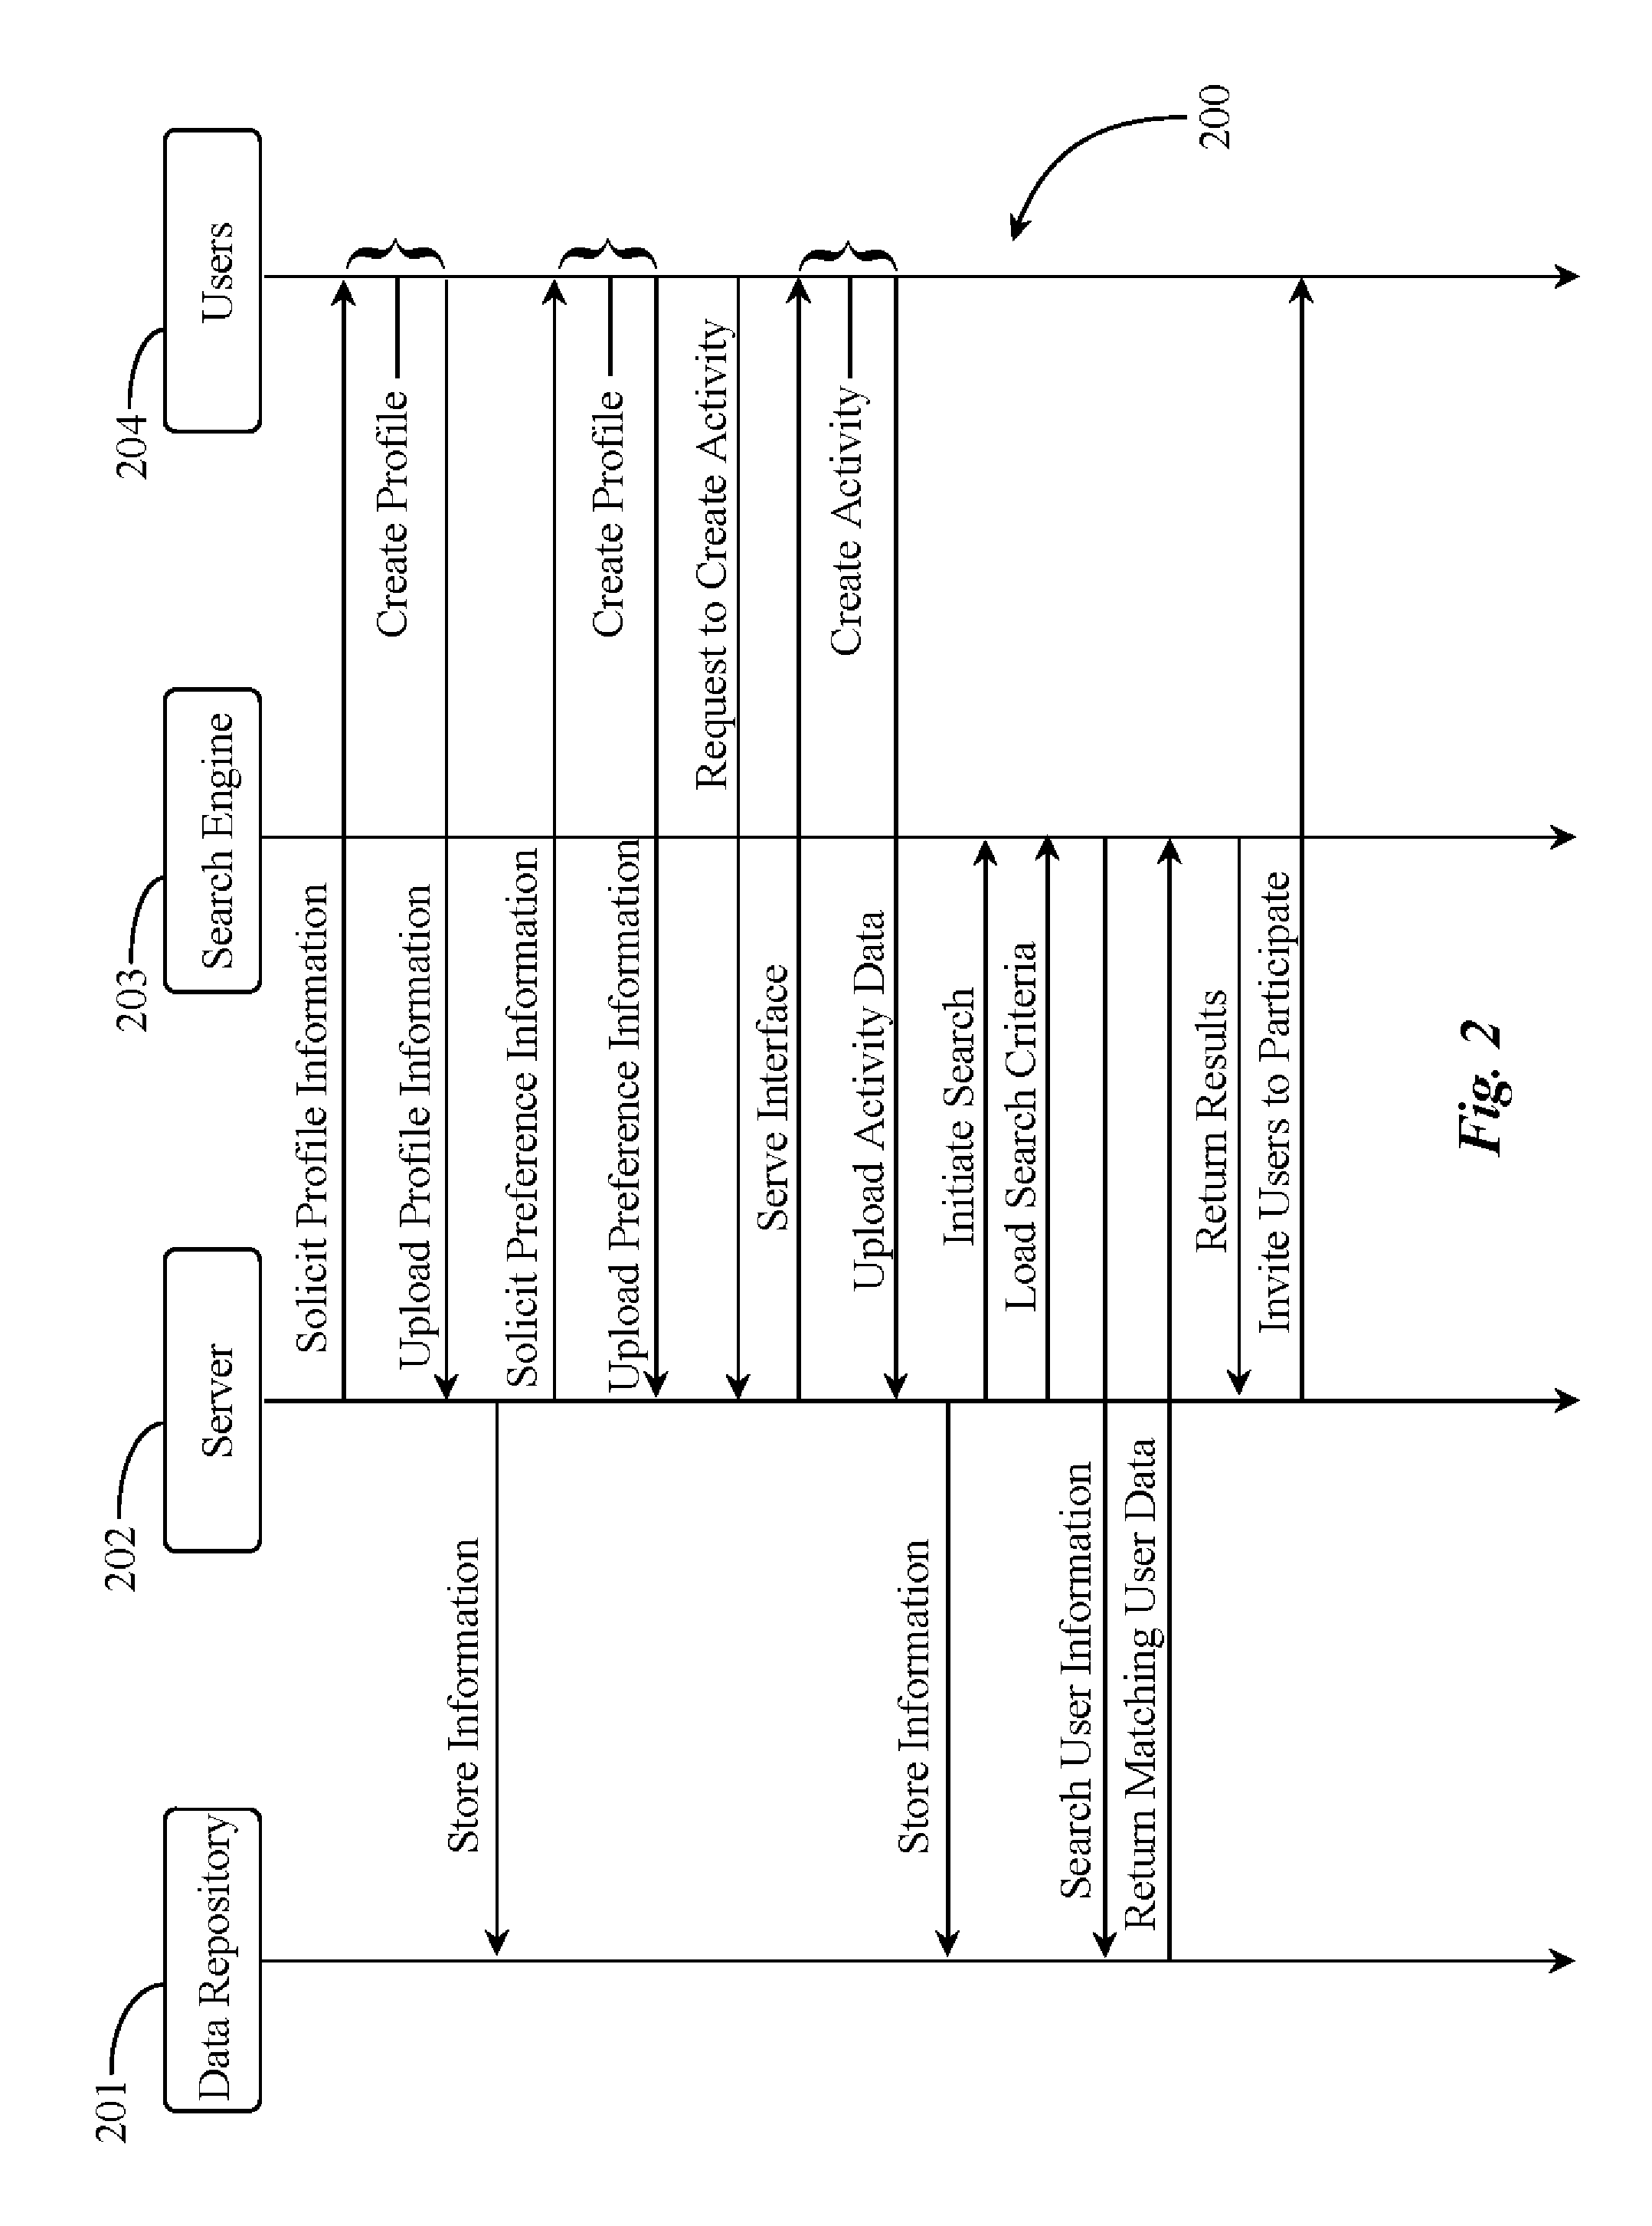 Systems and methods for automatically adjusting pricing for group activities over a data network